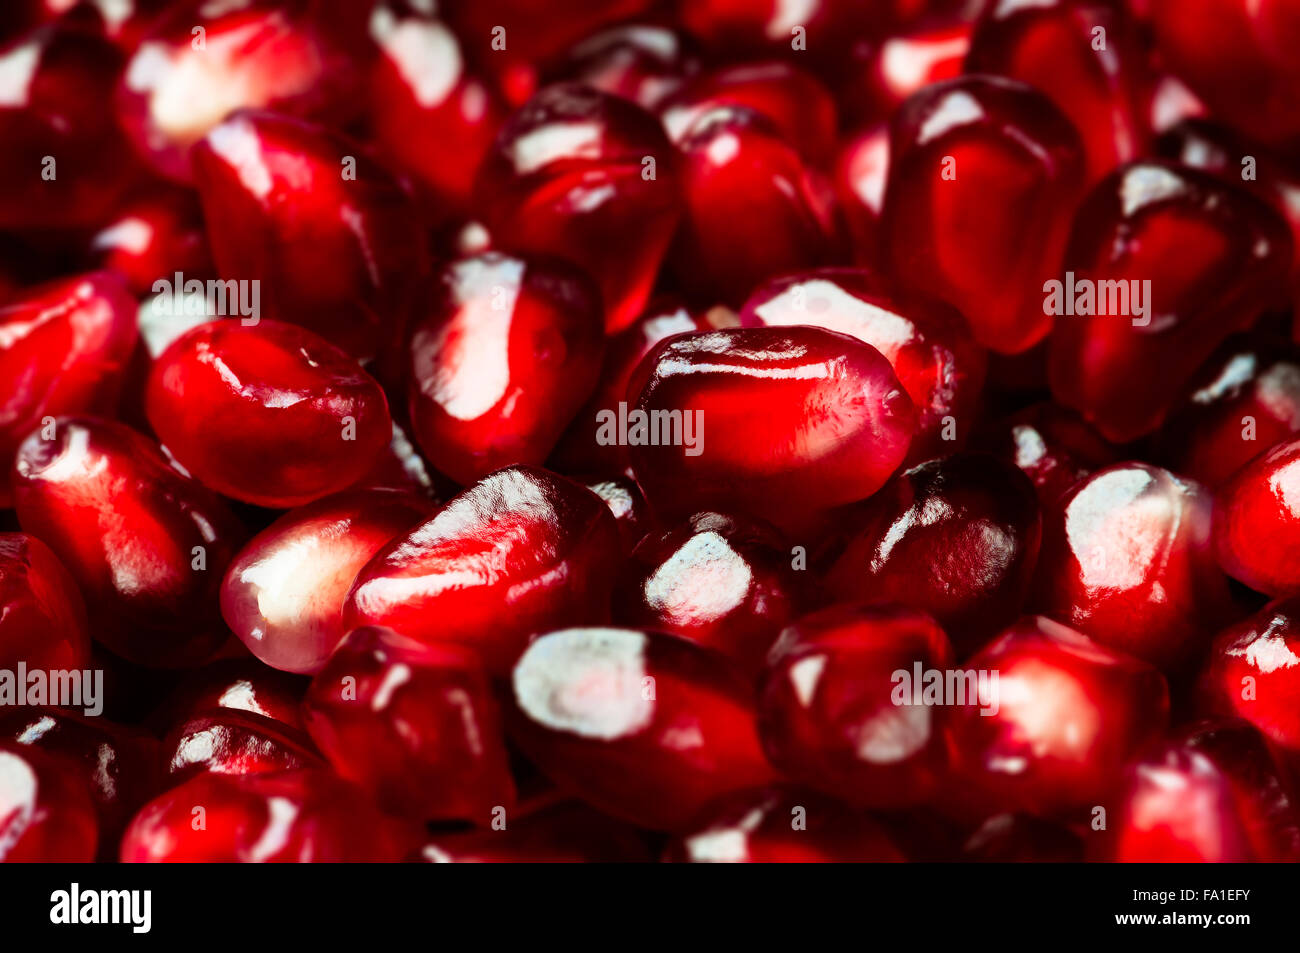 Delicious red ripe juicy pomegranate seed background texture macro closeup Stock Photo